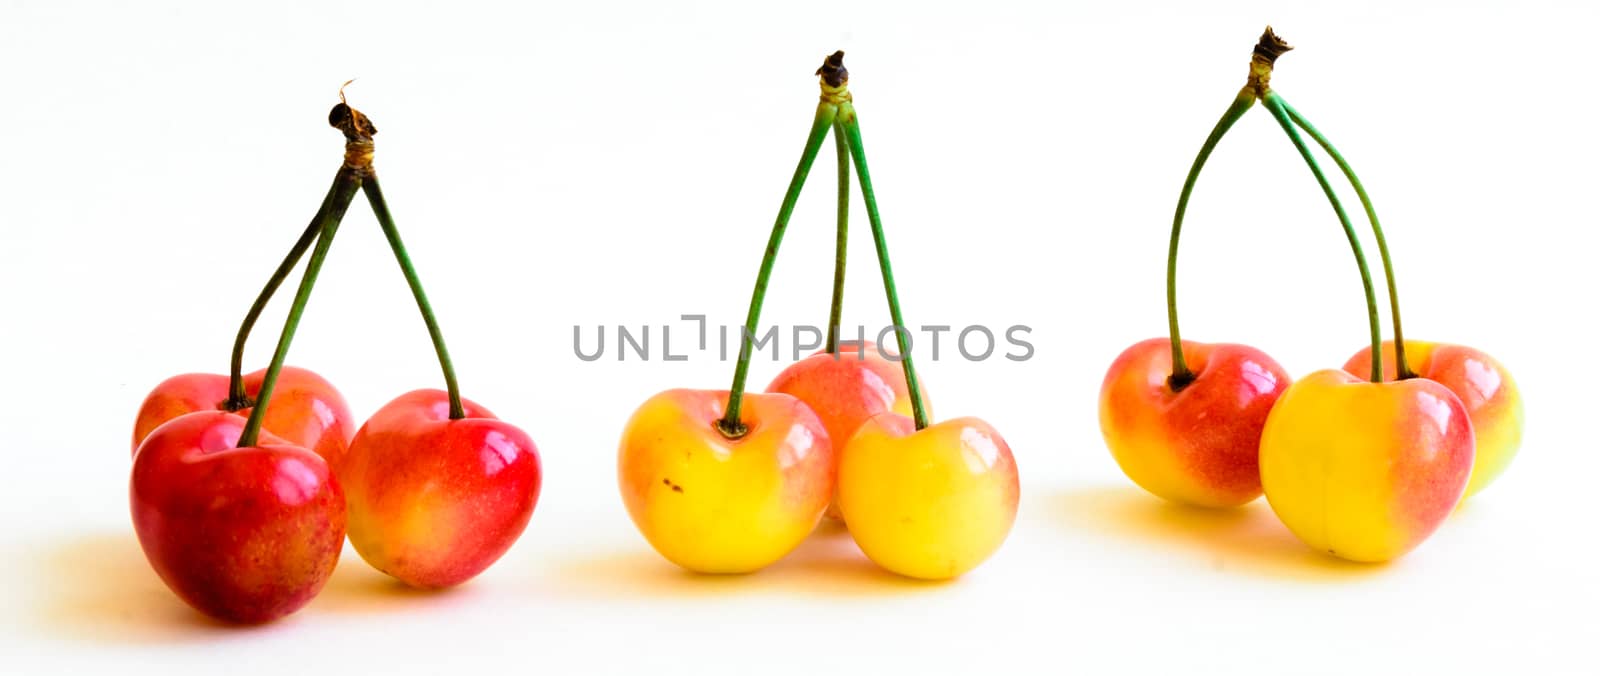 A row of three groups Rainer cherries joined stem isolated on white background. Fresh picked organic cherries grown in Yakima Valley, Washington State, USA.